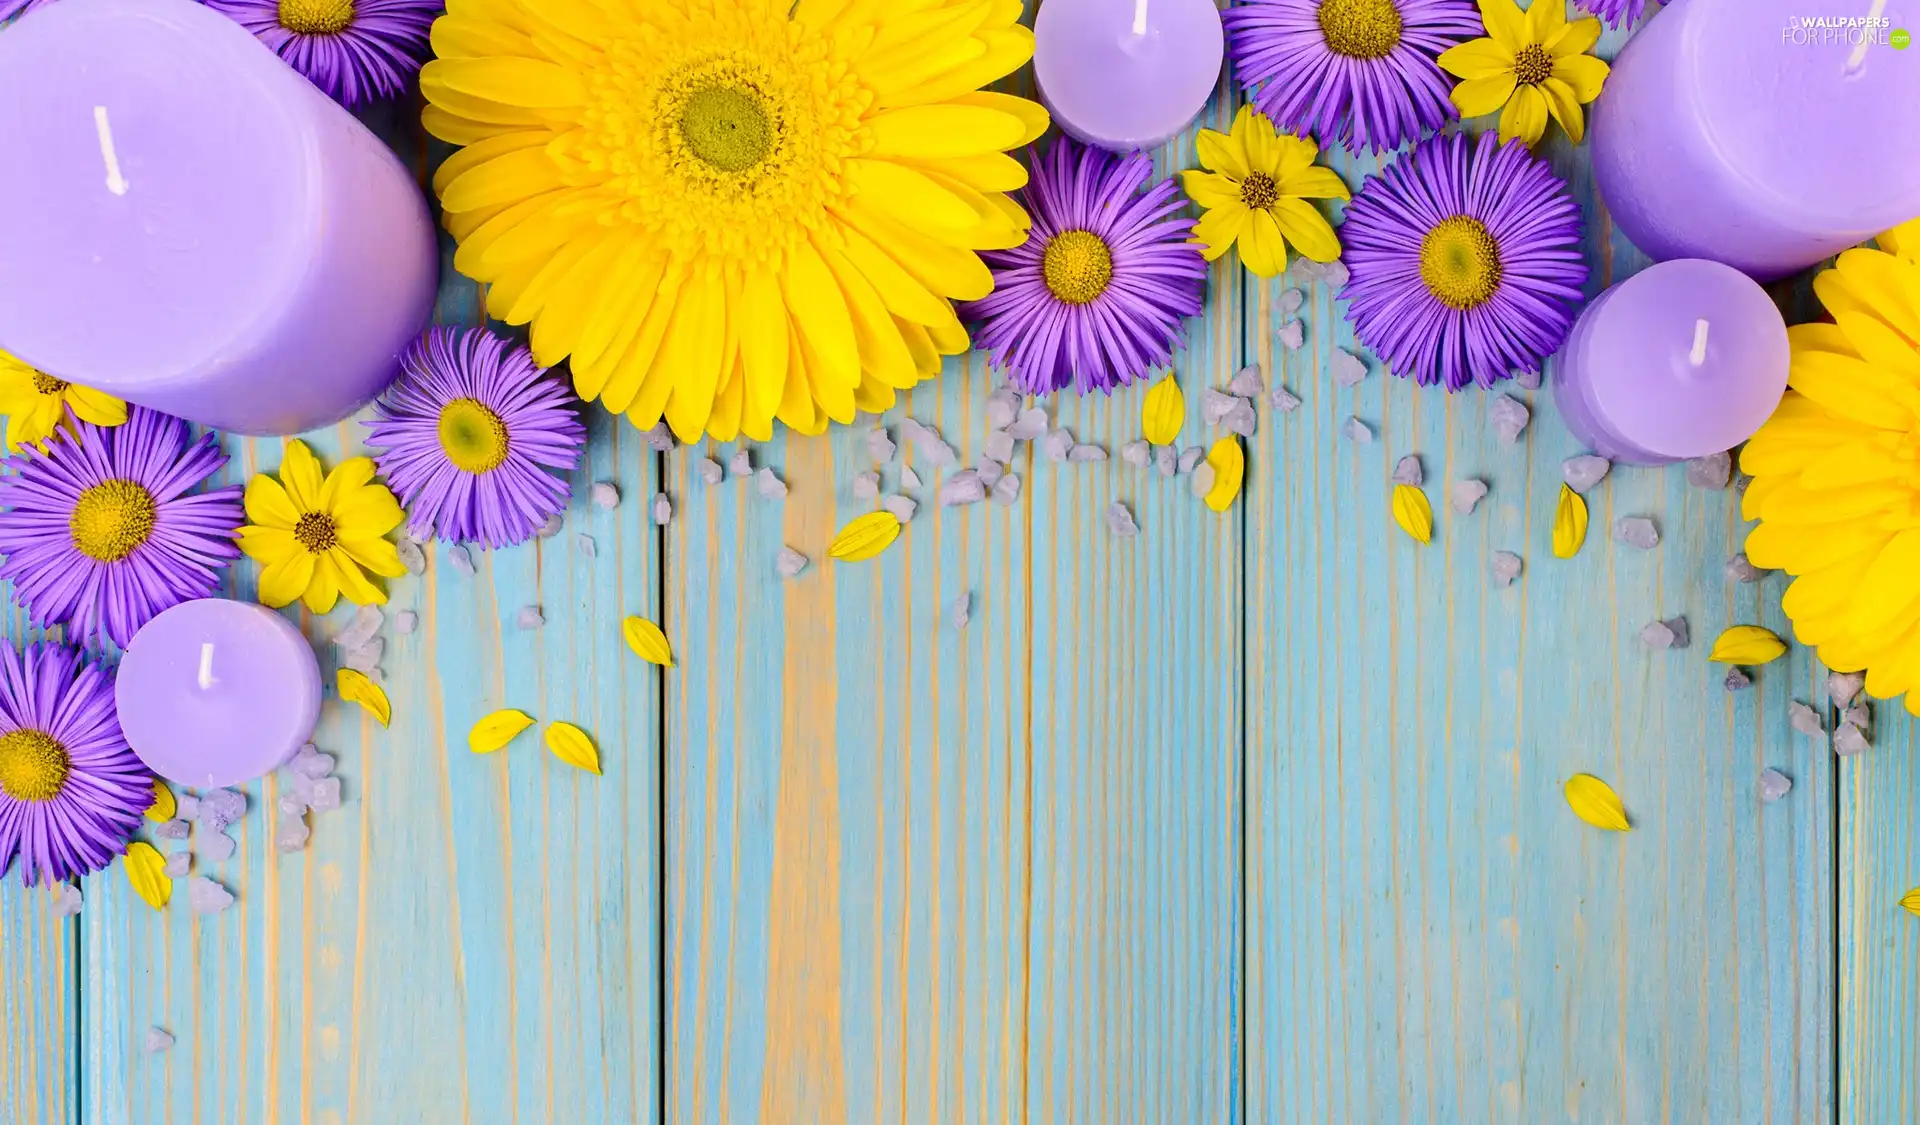 purple, Yellow, Candles, gerberas, Flowers, Astra, boarding